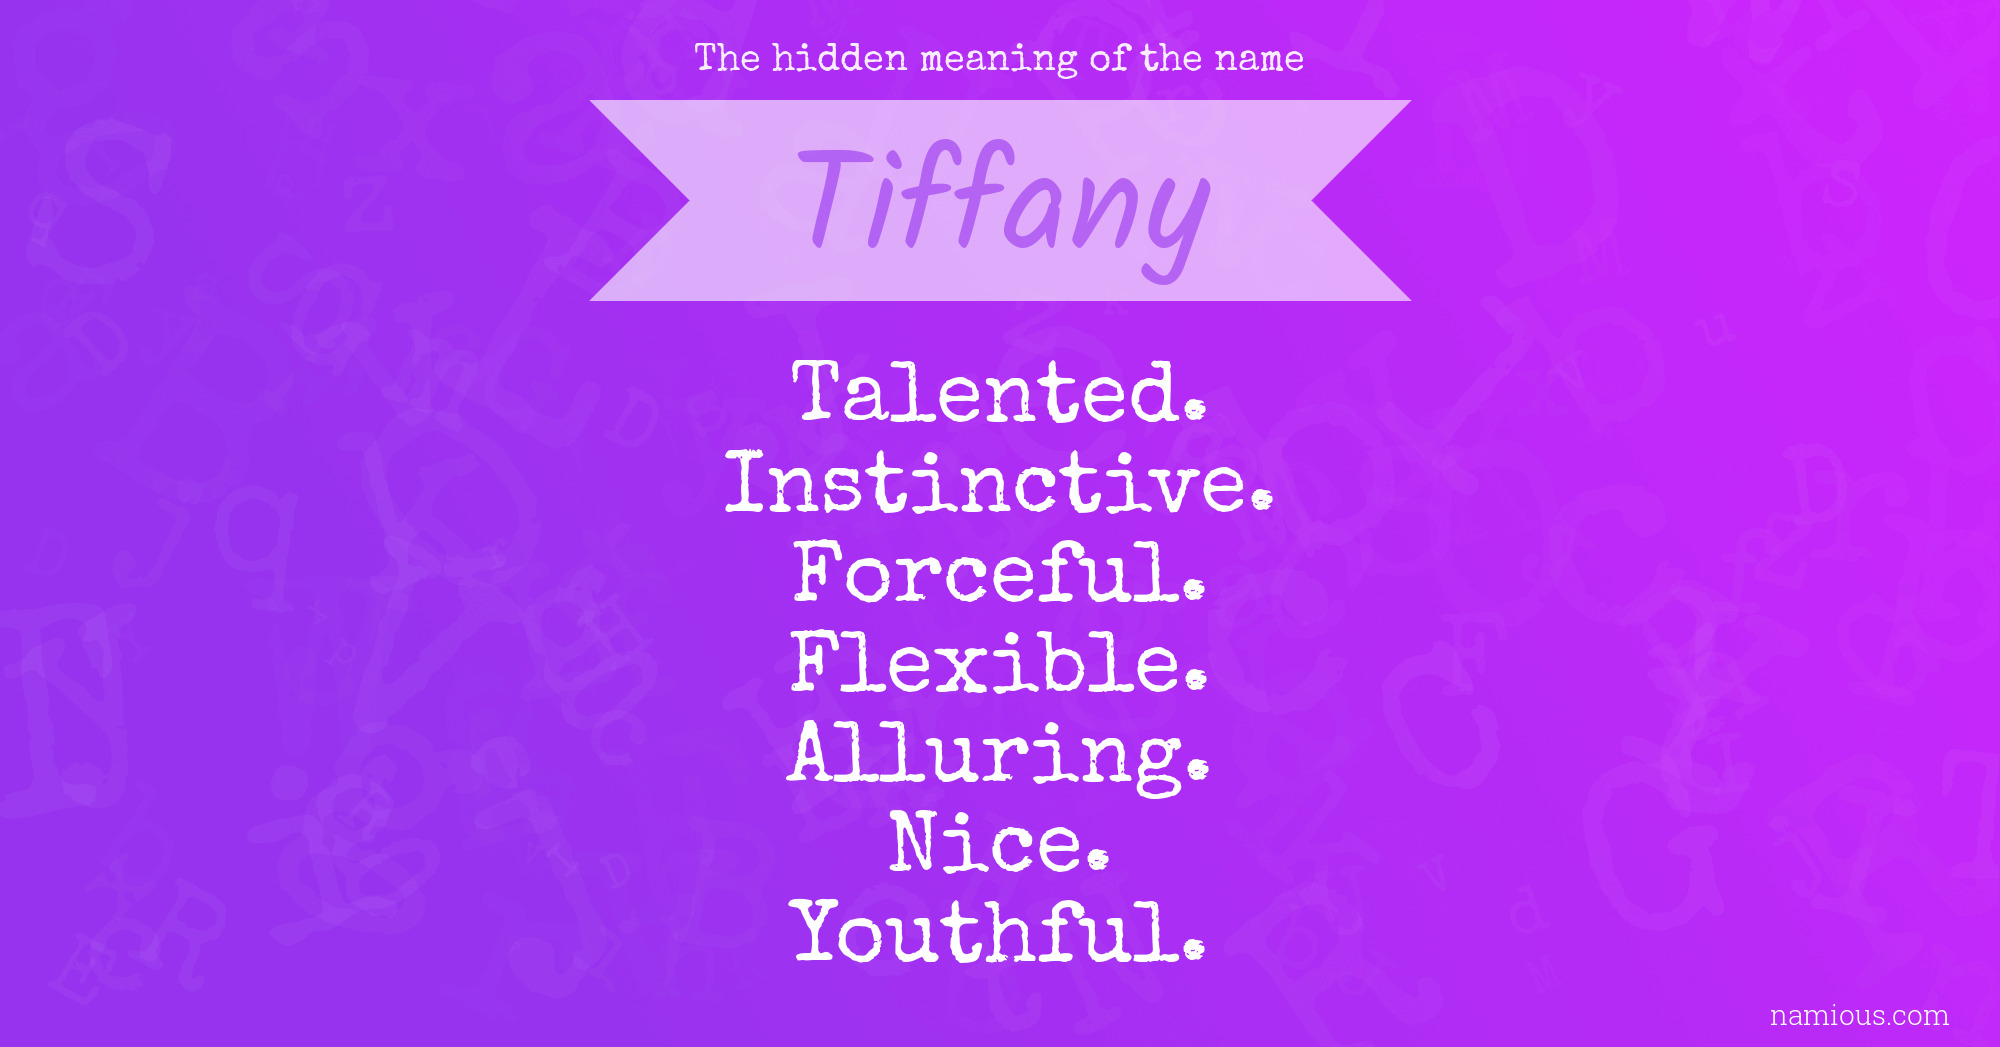 The hidden meaning of the name Tiffany